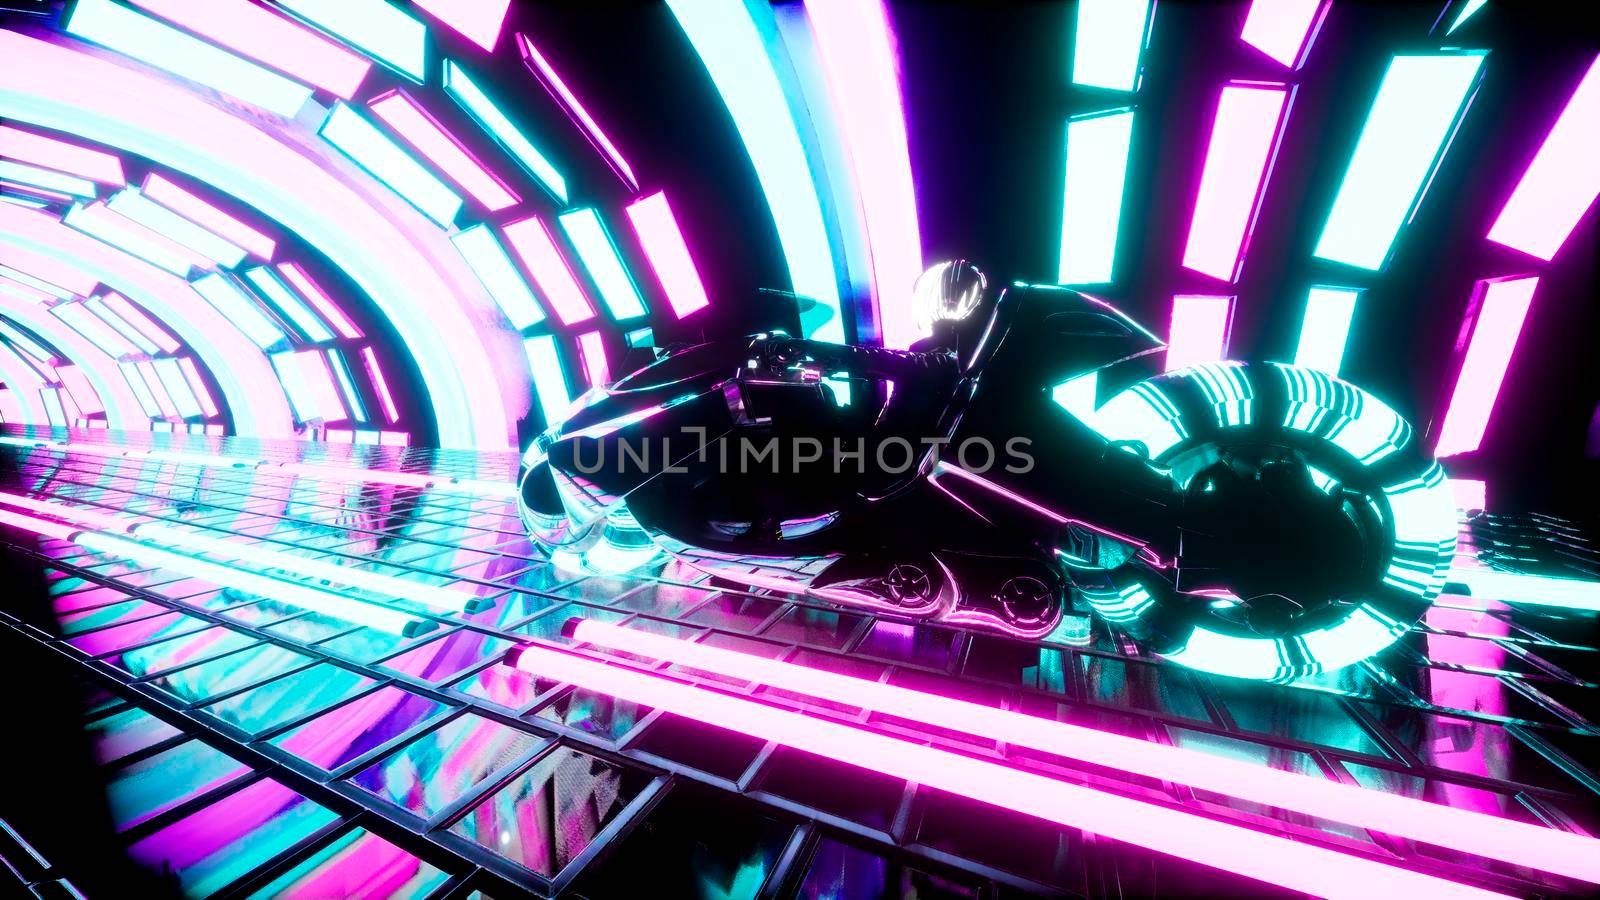 Cyber girl rides a motorcycle in a glowing neon tunnel. View of the glowing neon corridor.